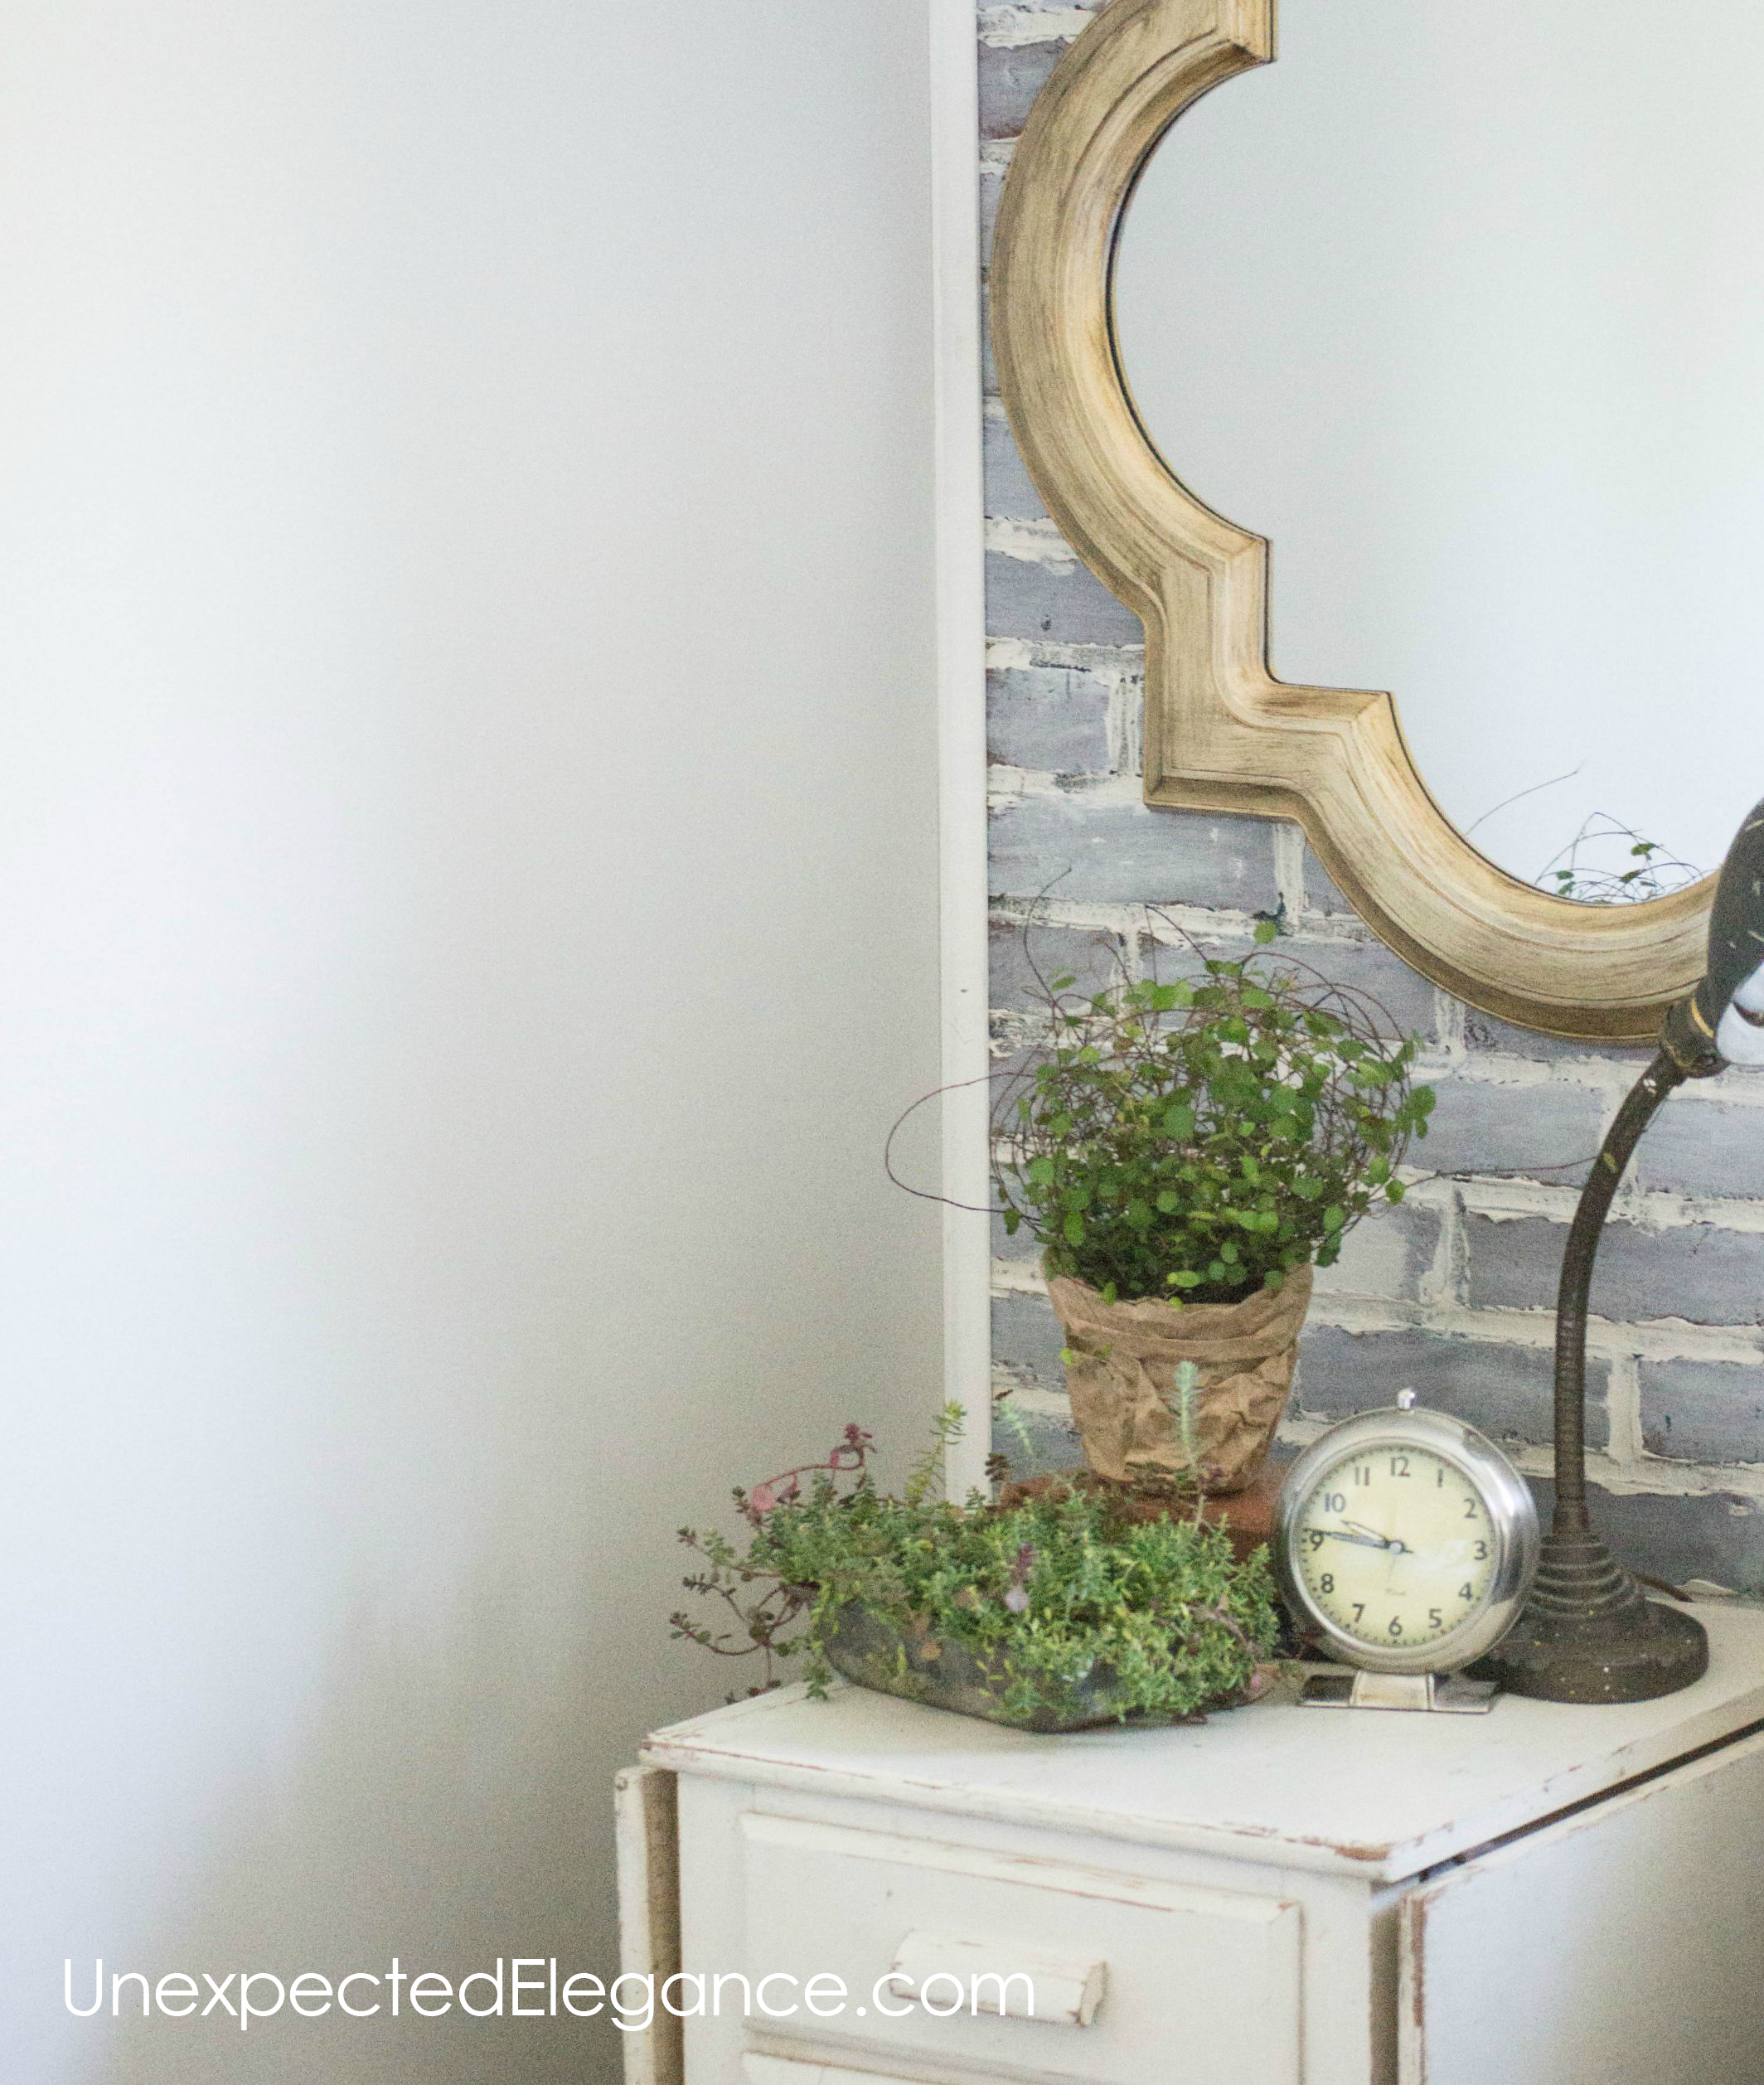 Do you have a space that needs a little bit of texture and love the look of brick? Check out this tutorial for a DIY brick wall that looks like the real thing! Just a few easy steps can transform a faux brick panel and no one will be able to tell they aren't real brick walls.